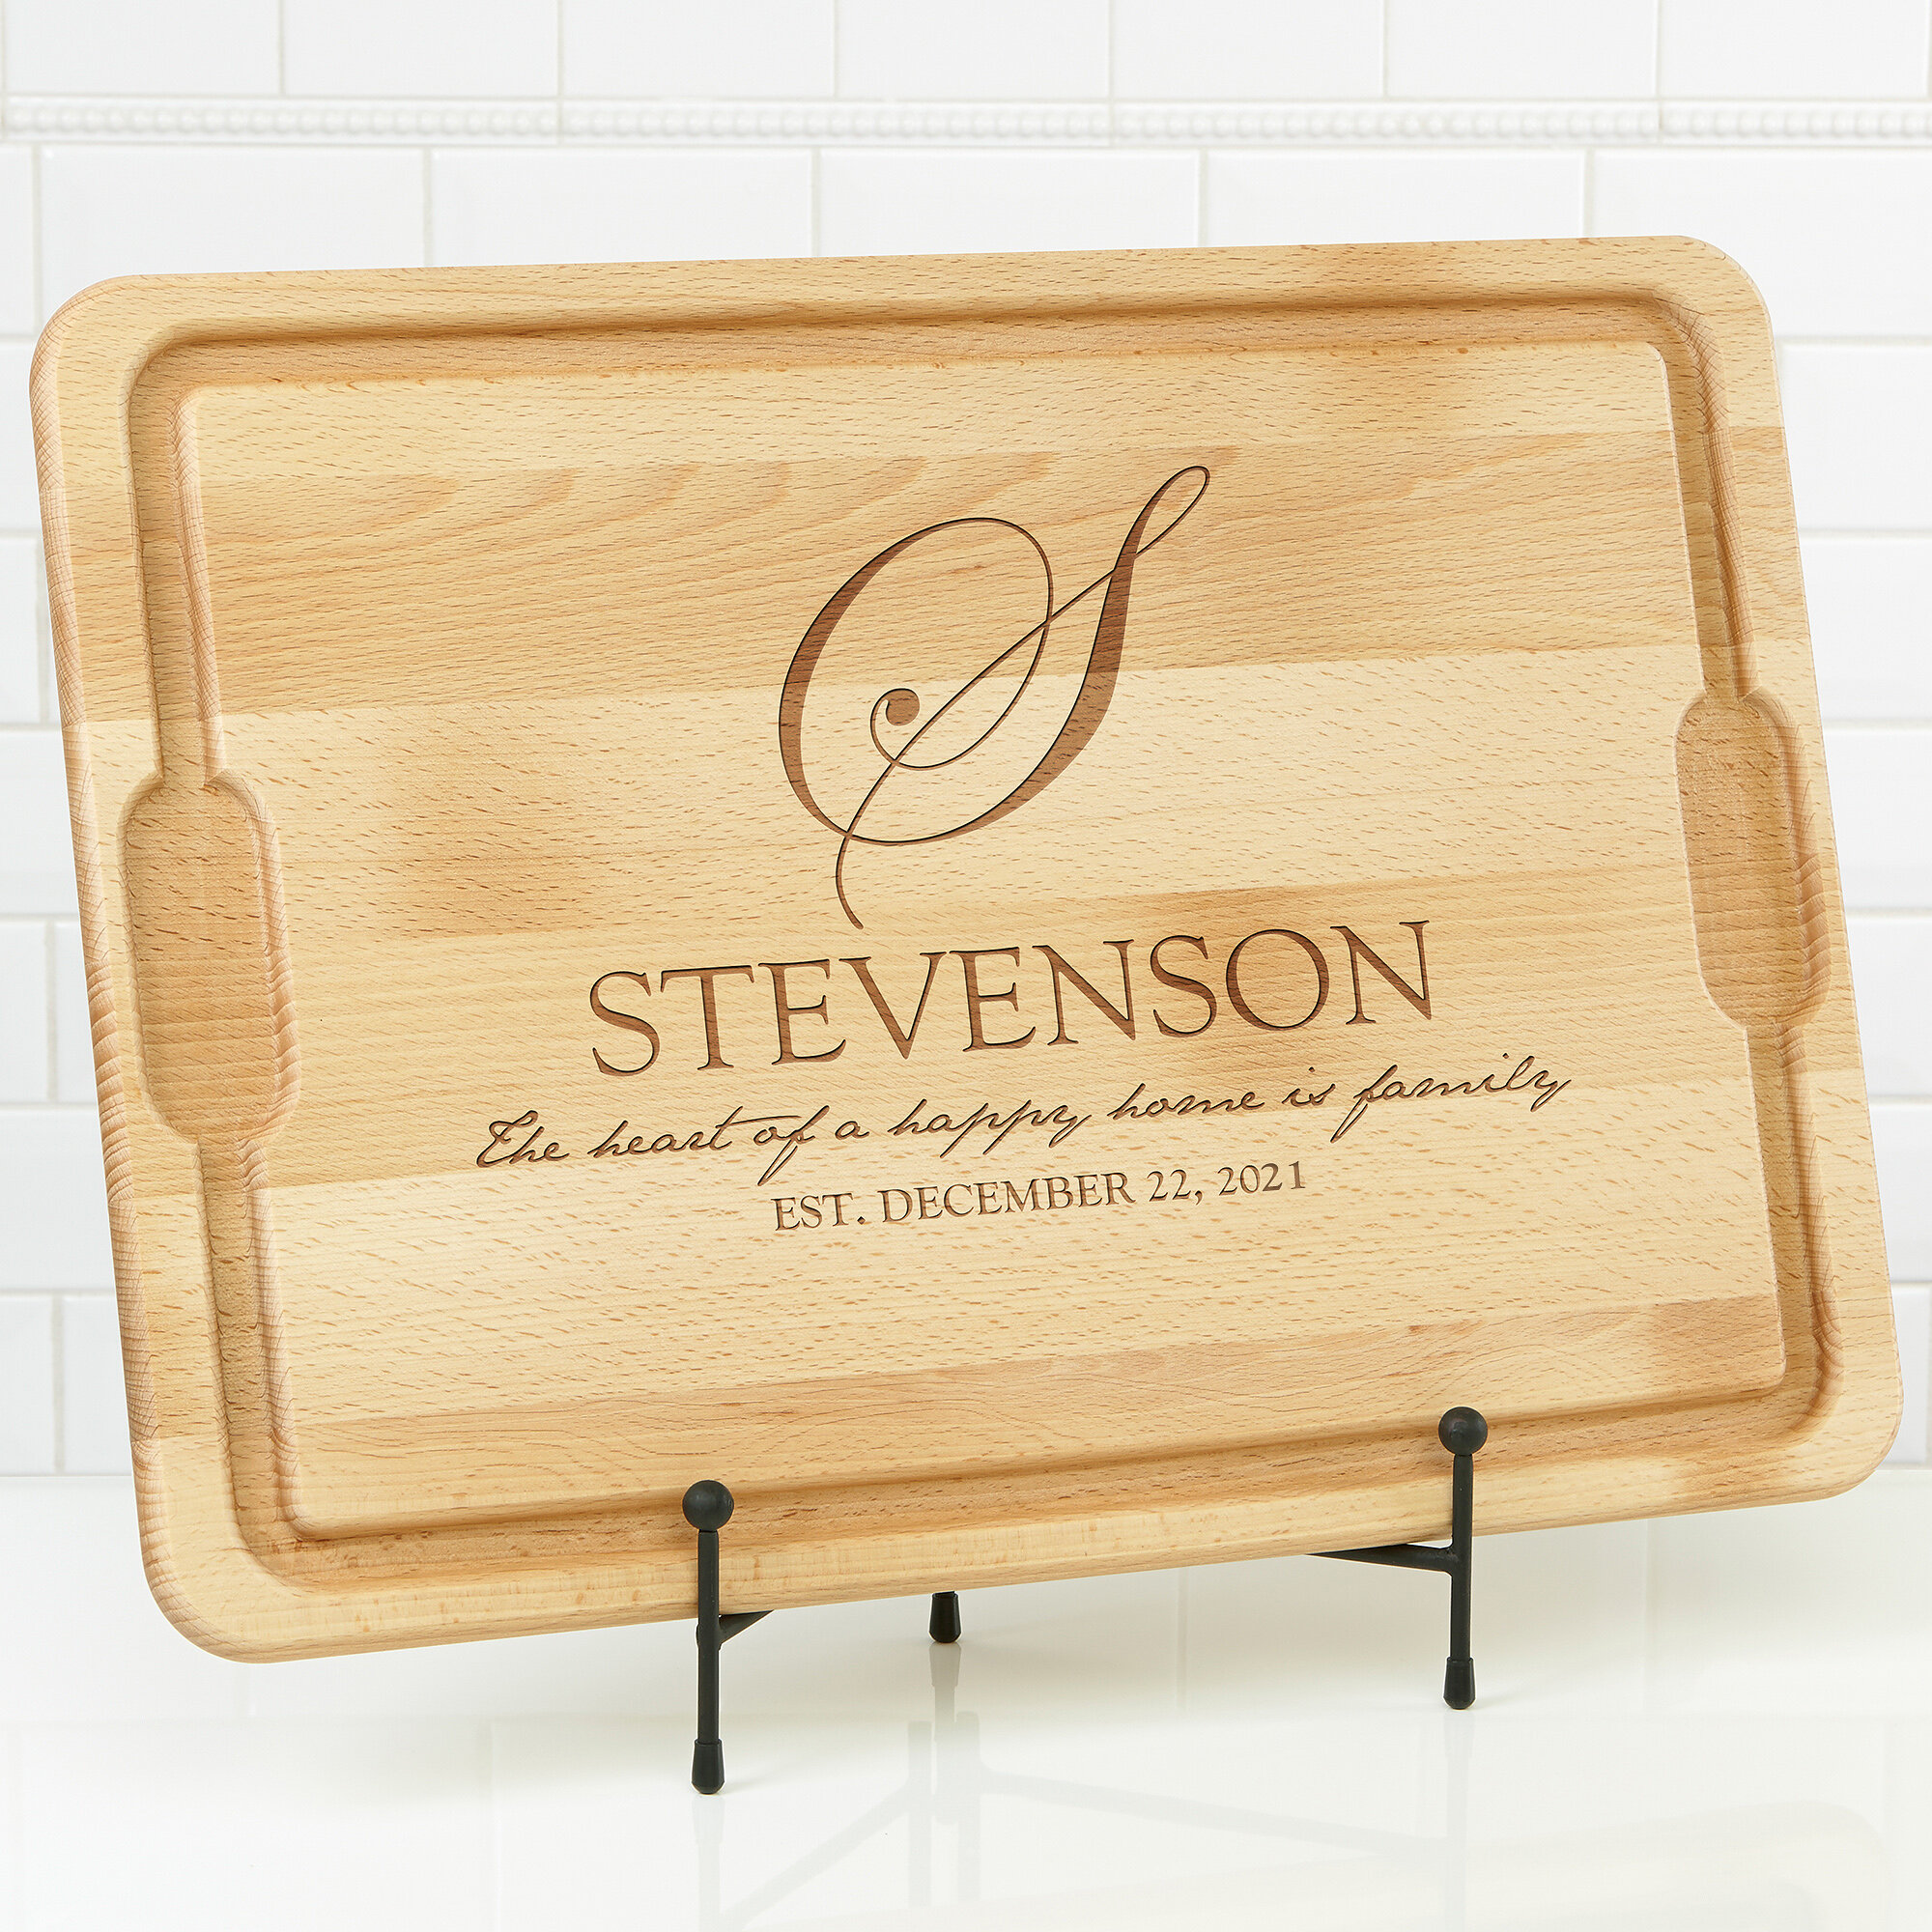 Personalization Mall Heart Of Our Home Personalized Maple Cutting Board And Reviews Wayfair 